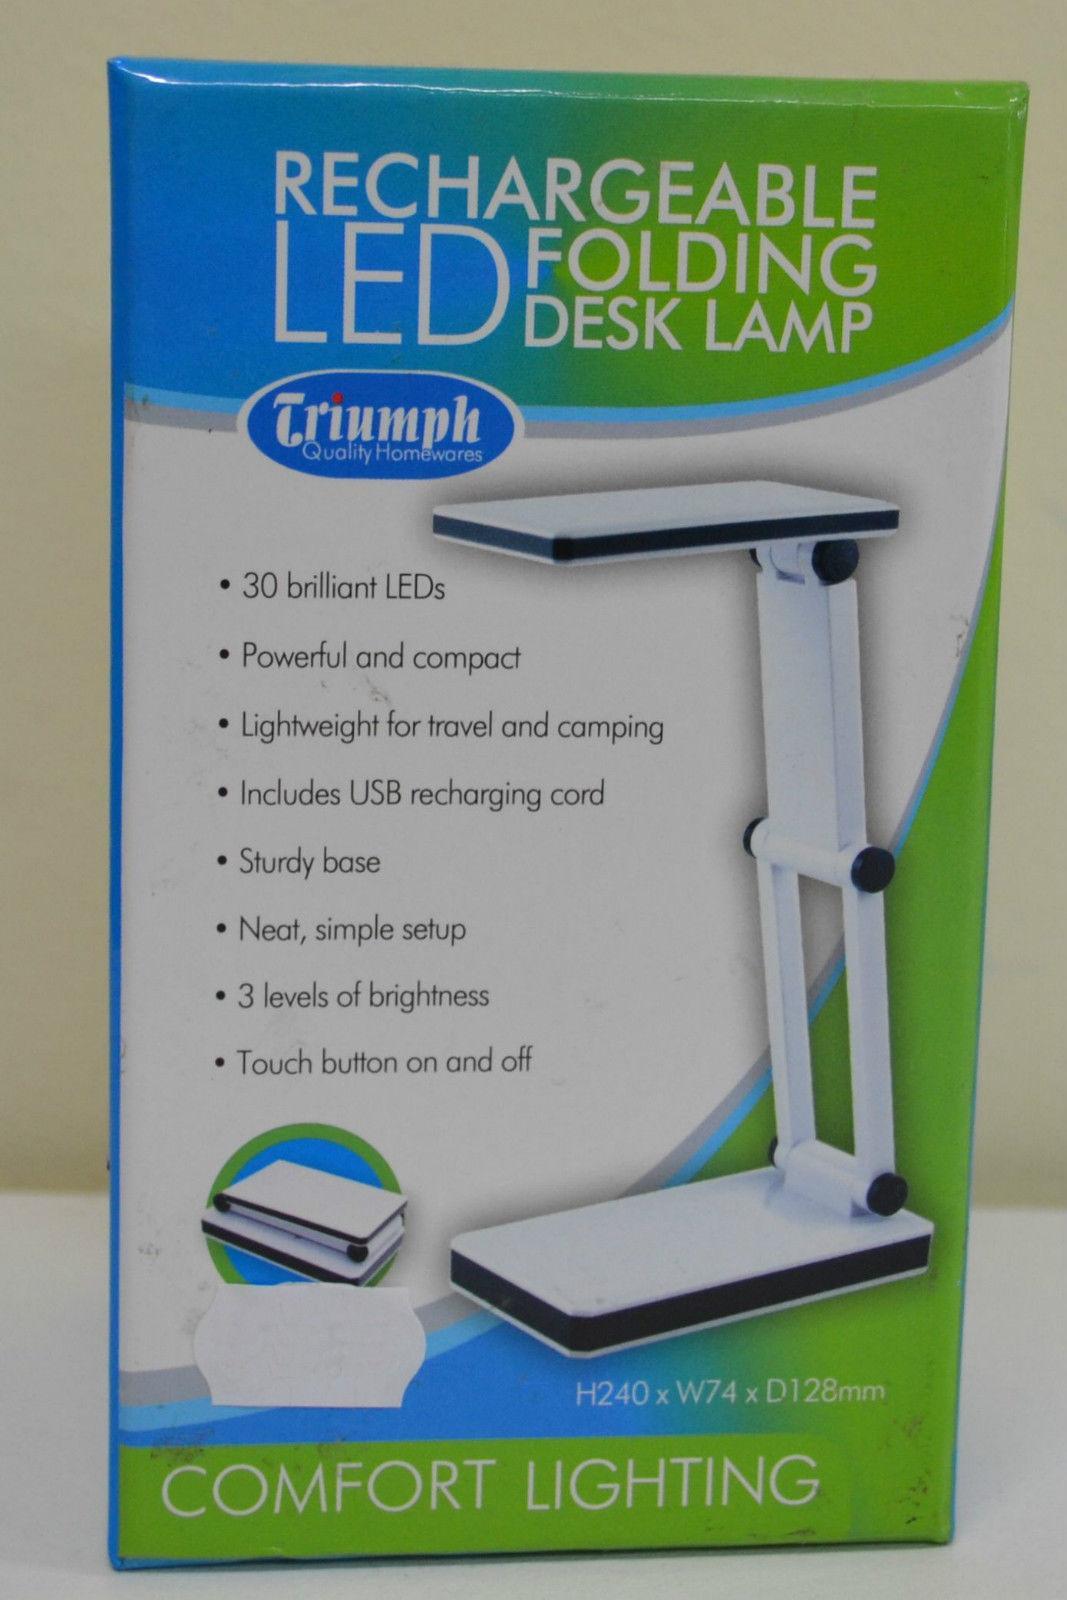 WHITE Triumph Rechargeable Folding Desk Lamp Table, Craft, Sewing, Hobby LED USB